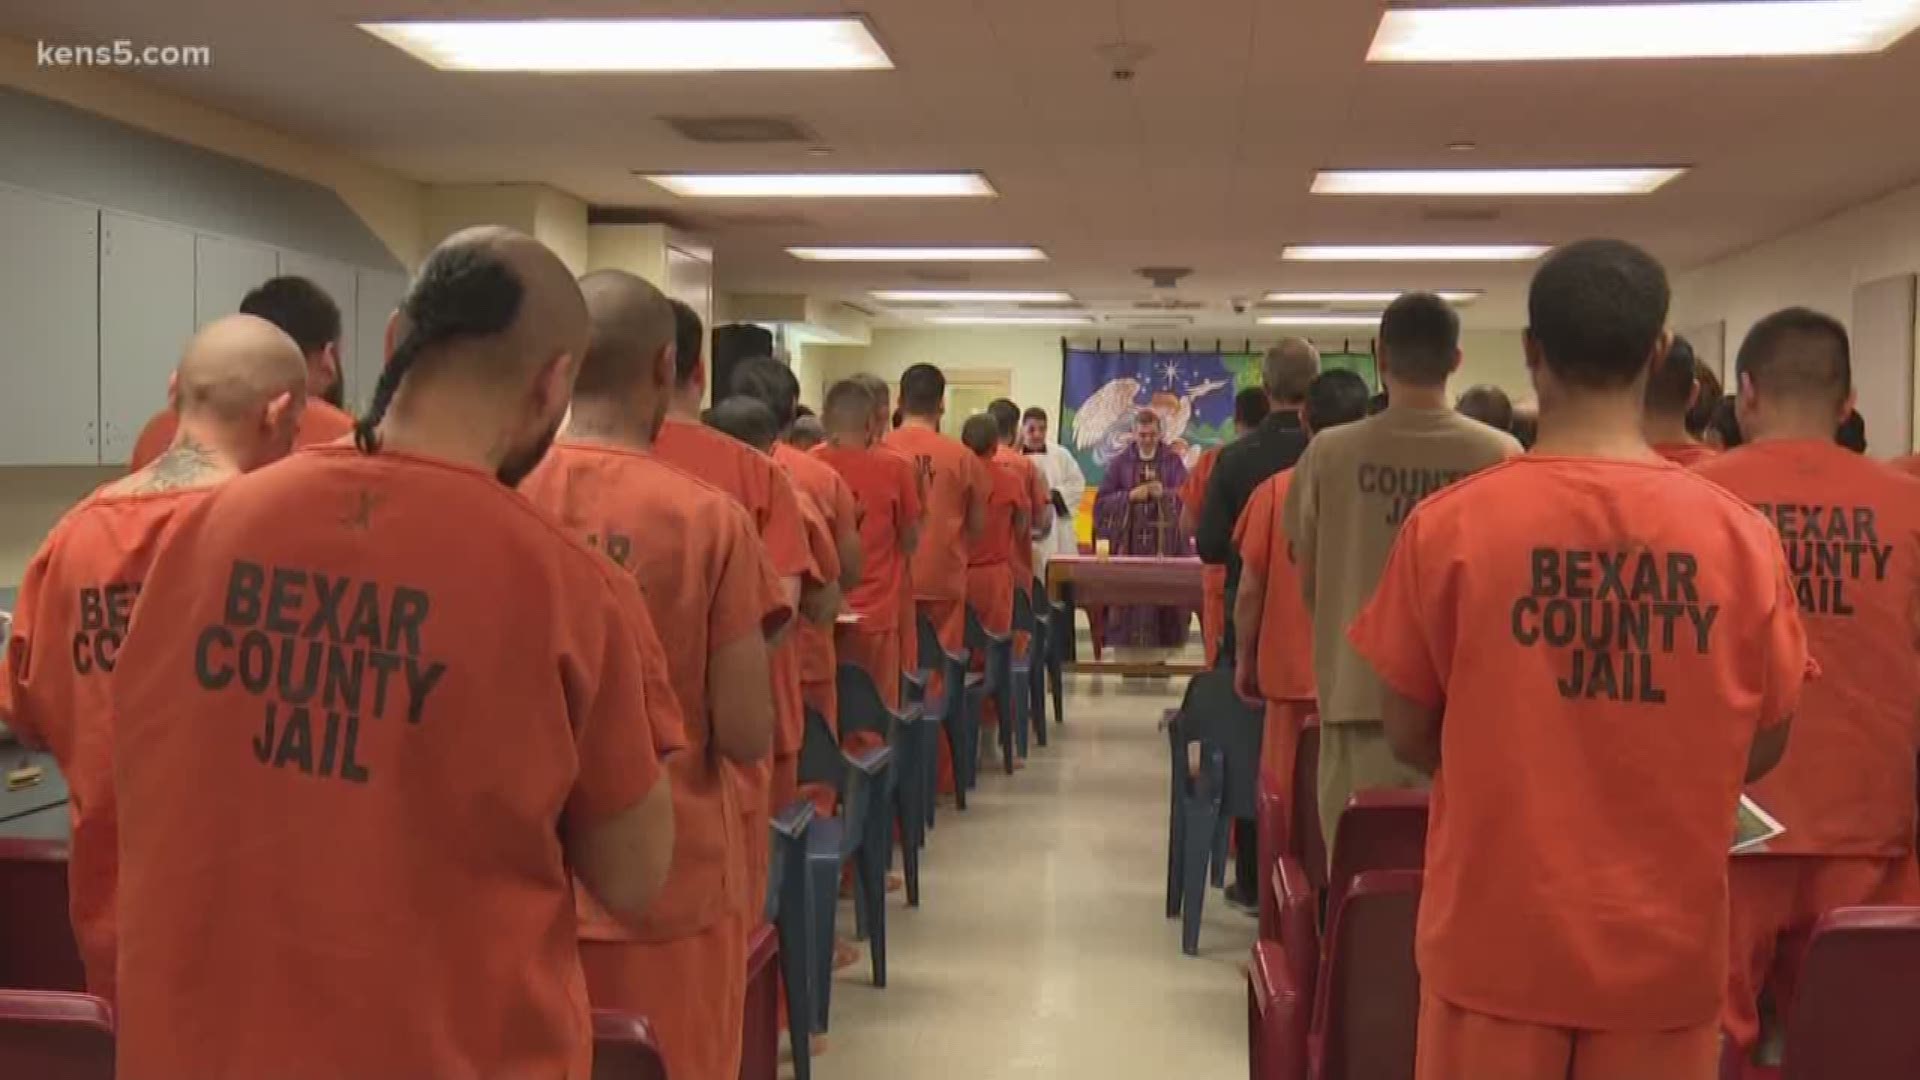 The Archbishop went to jail this afternoon, not as a prisoner, but as a servant, celebrating a Mass for those who will be spending the holidays locked up. Eyewitness News reporter Sue Calberg has more.